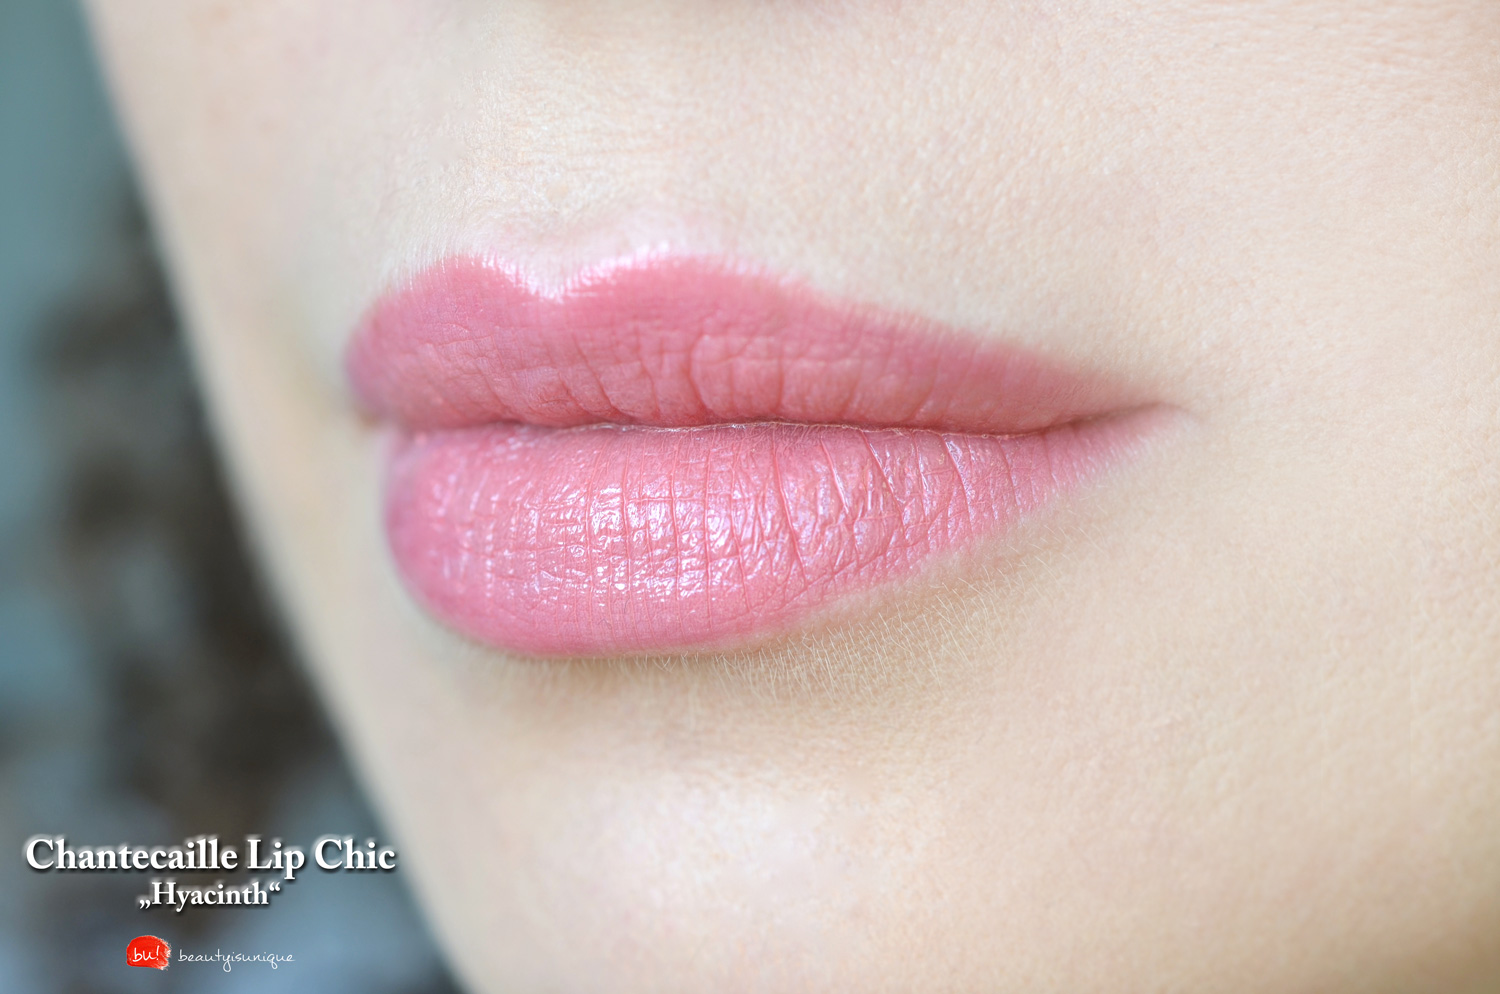 chantecaille-hyacinth-lip-chic-swatches